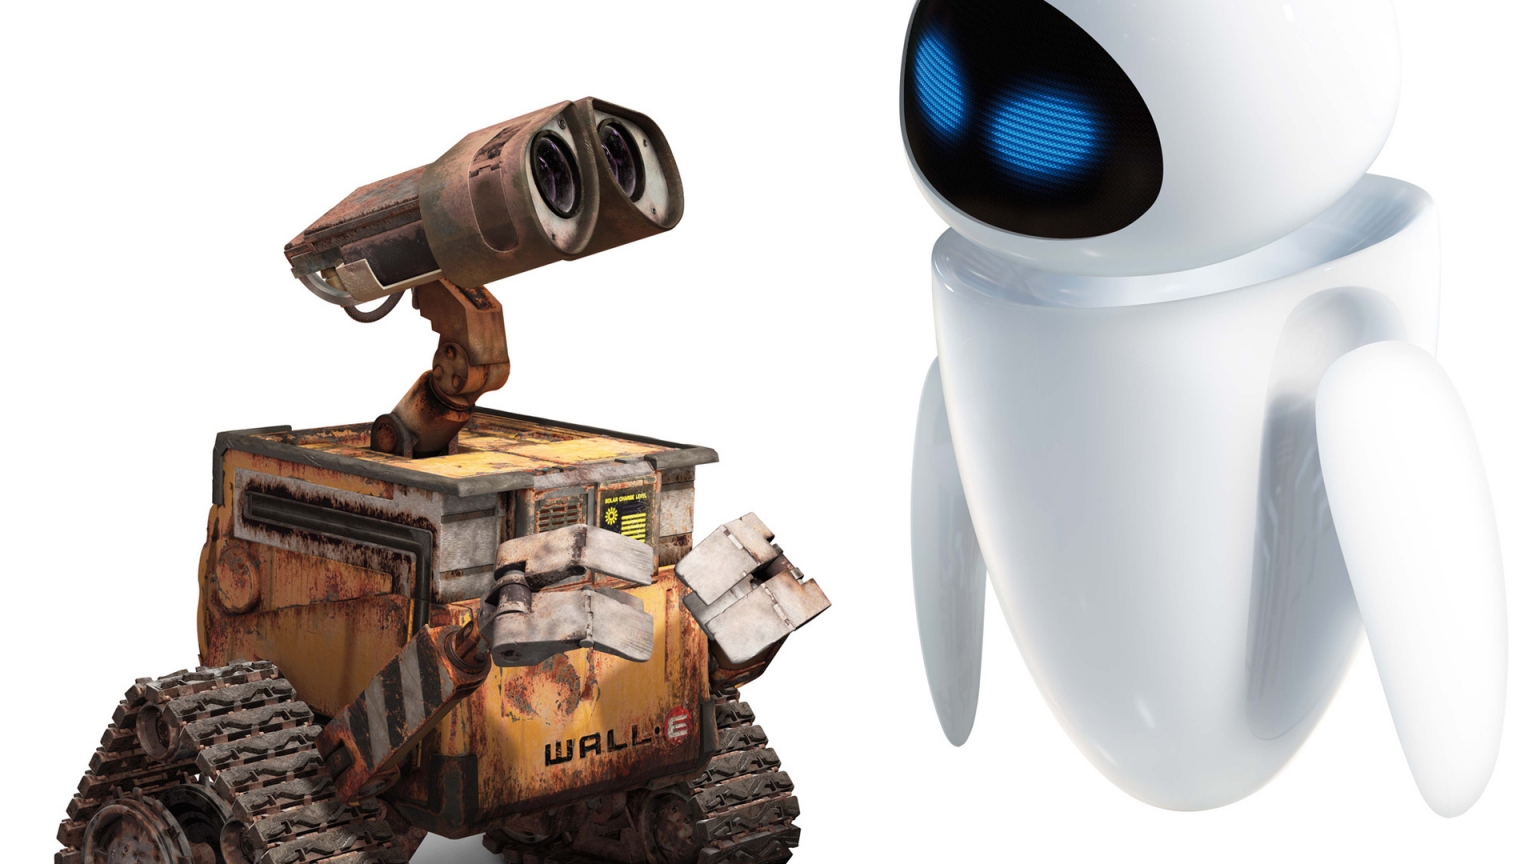 Walle Robots for 1536 x 864 HDTV resolution